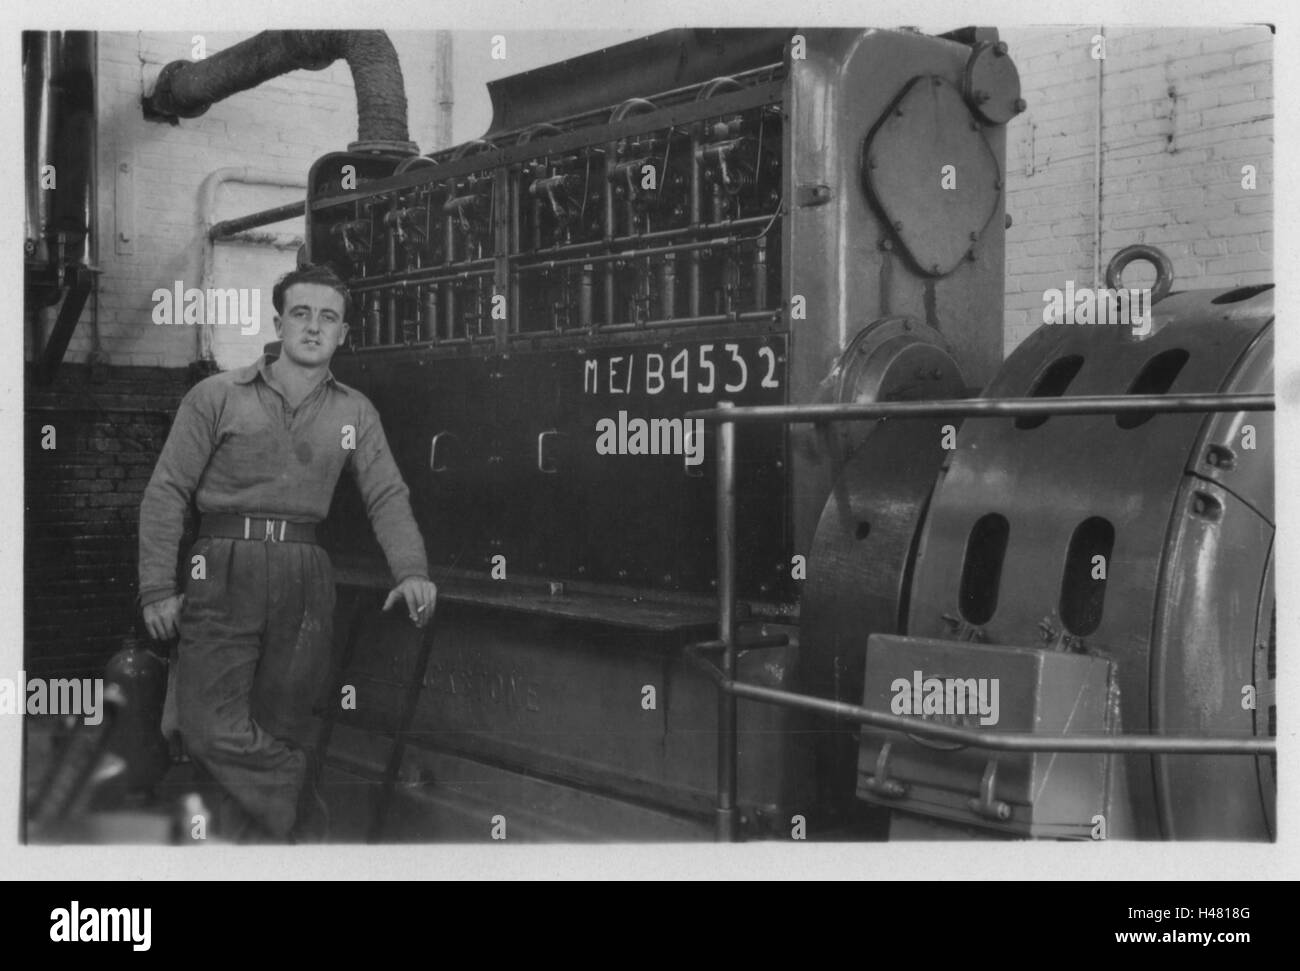 British army engineer identified as John Cotterell standing next to a Mirrlees Blackstone diesel generator nicknamed The Mighty Whirlitzer. Photo taken in 10 Base Ordnance Depot Royal Army Ordnance Corps (RAOC) camp at Geneifa Ismailia area near the Suez Canal 1952 Egypt. Stock Photo